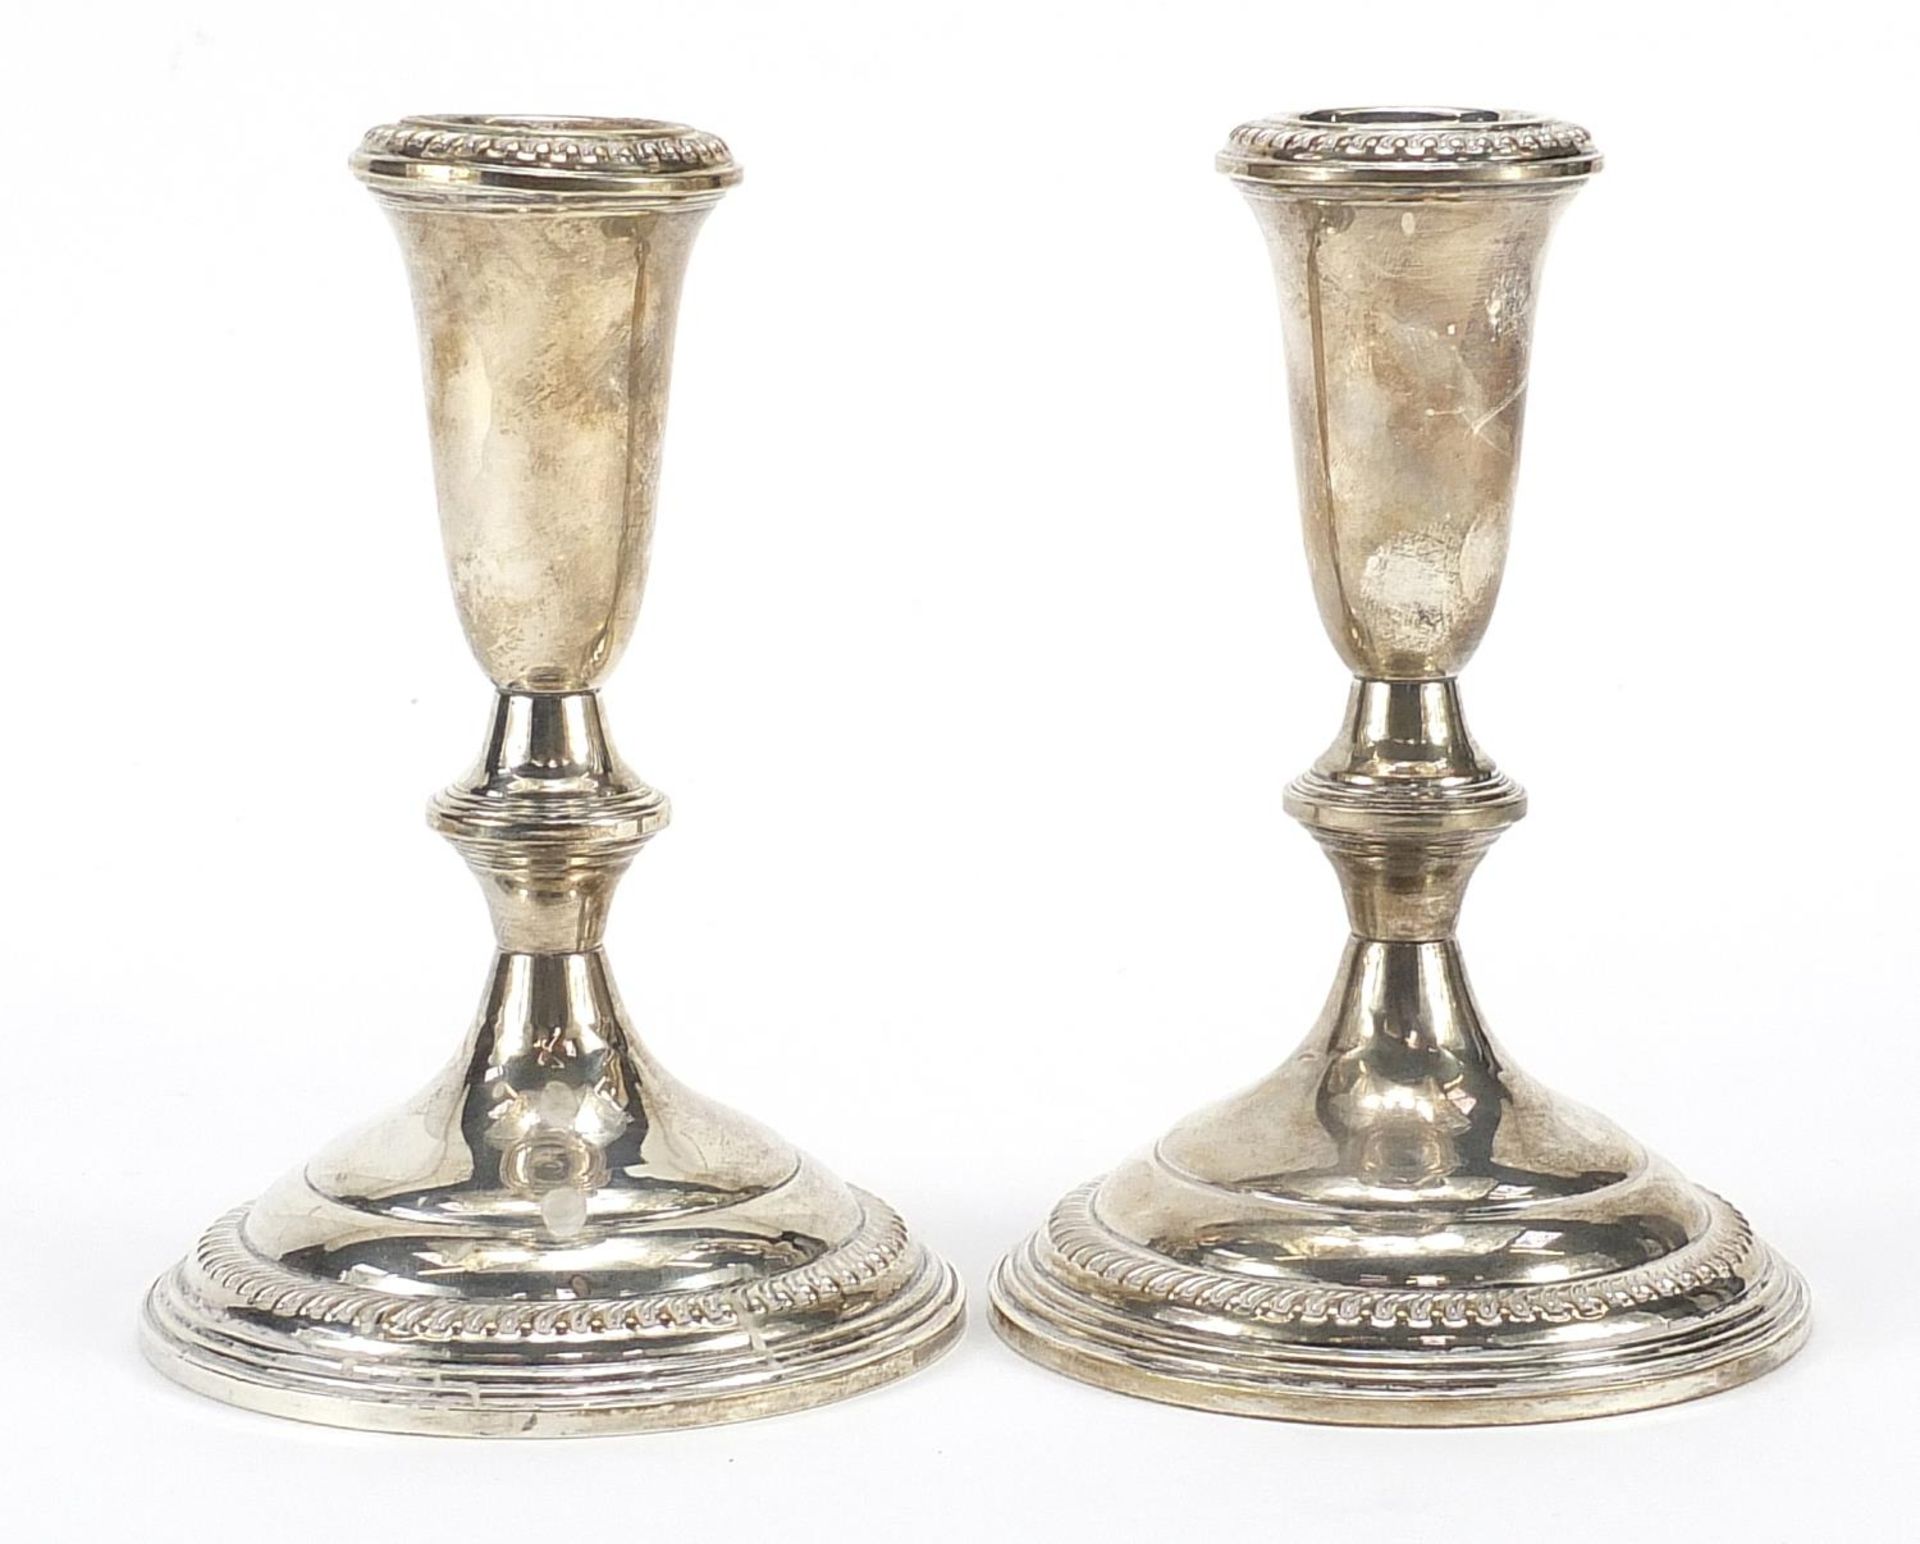 Pair of sterling silver weighted candlesticks, 14cm high, 775.0g - Image 2 of 4